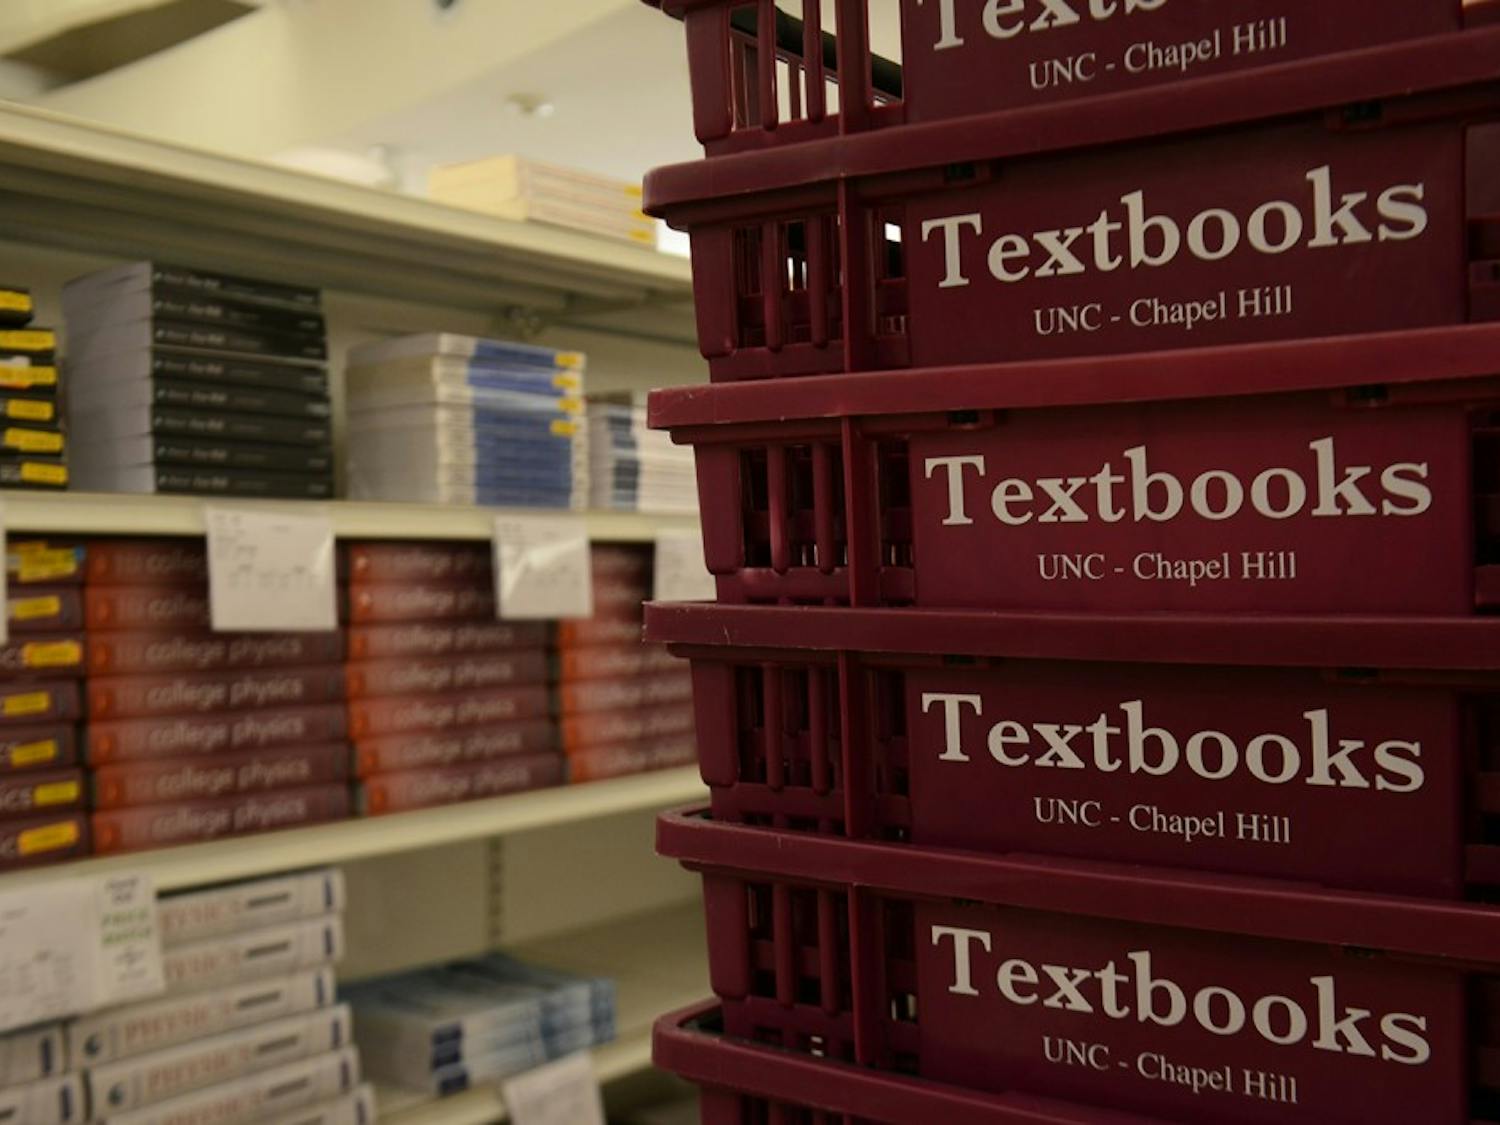 The stores under Barnes & Noble College are putting more emphasis on textbook rental and student behaviors around textbook buyback and rentals.&nbsp;